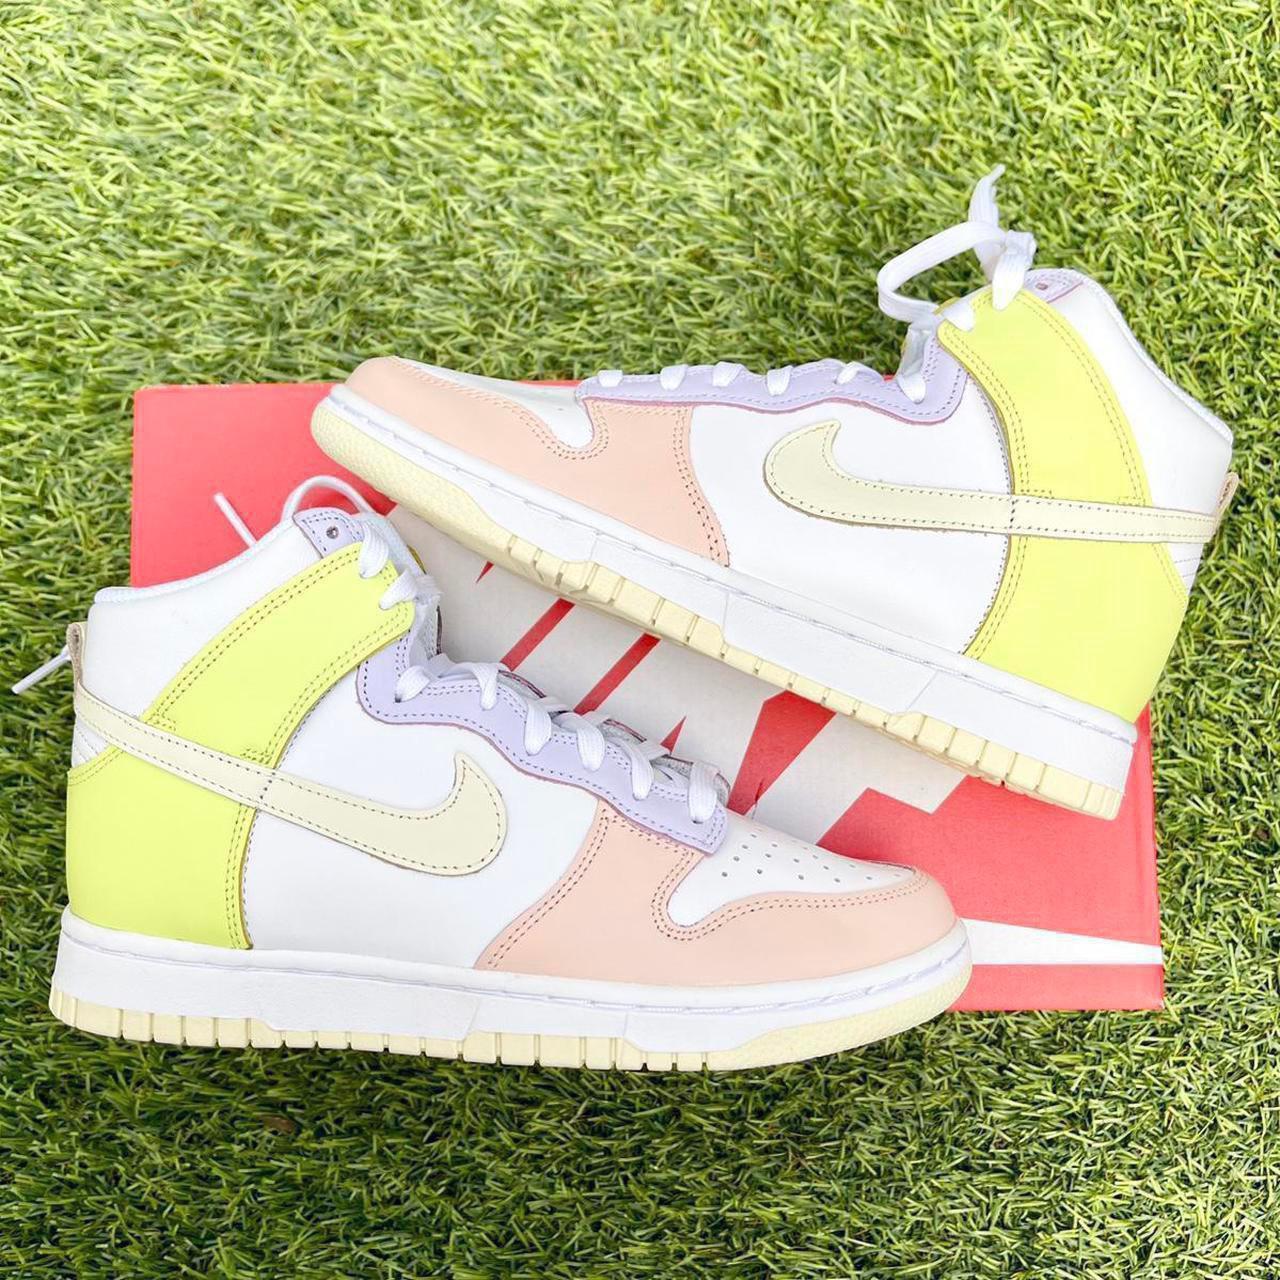 Product Image 2 - Nike Dunk high pastel GS

Brand